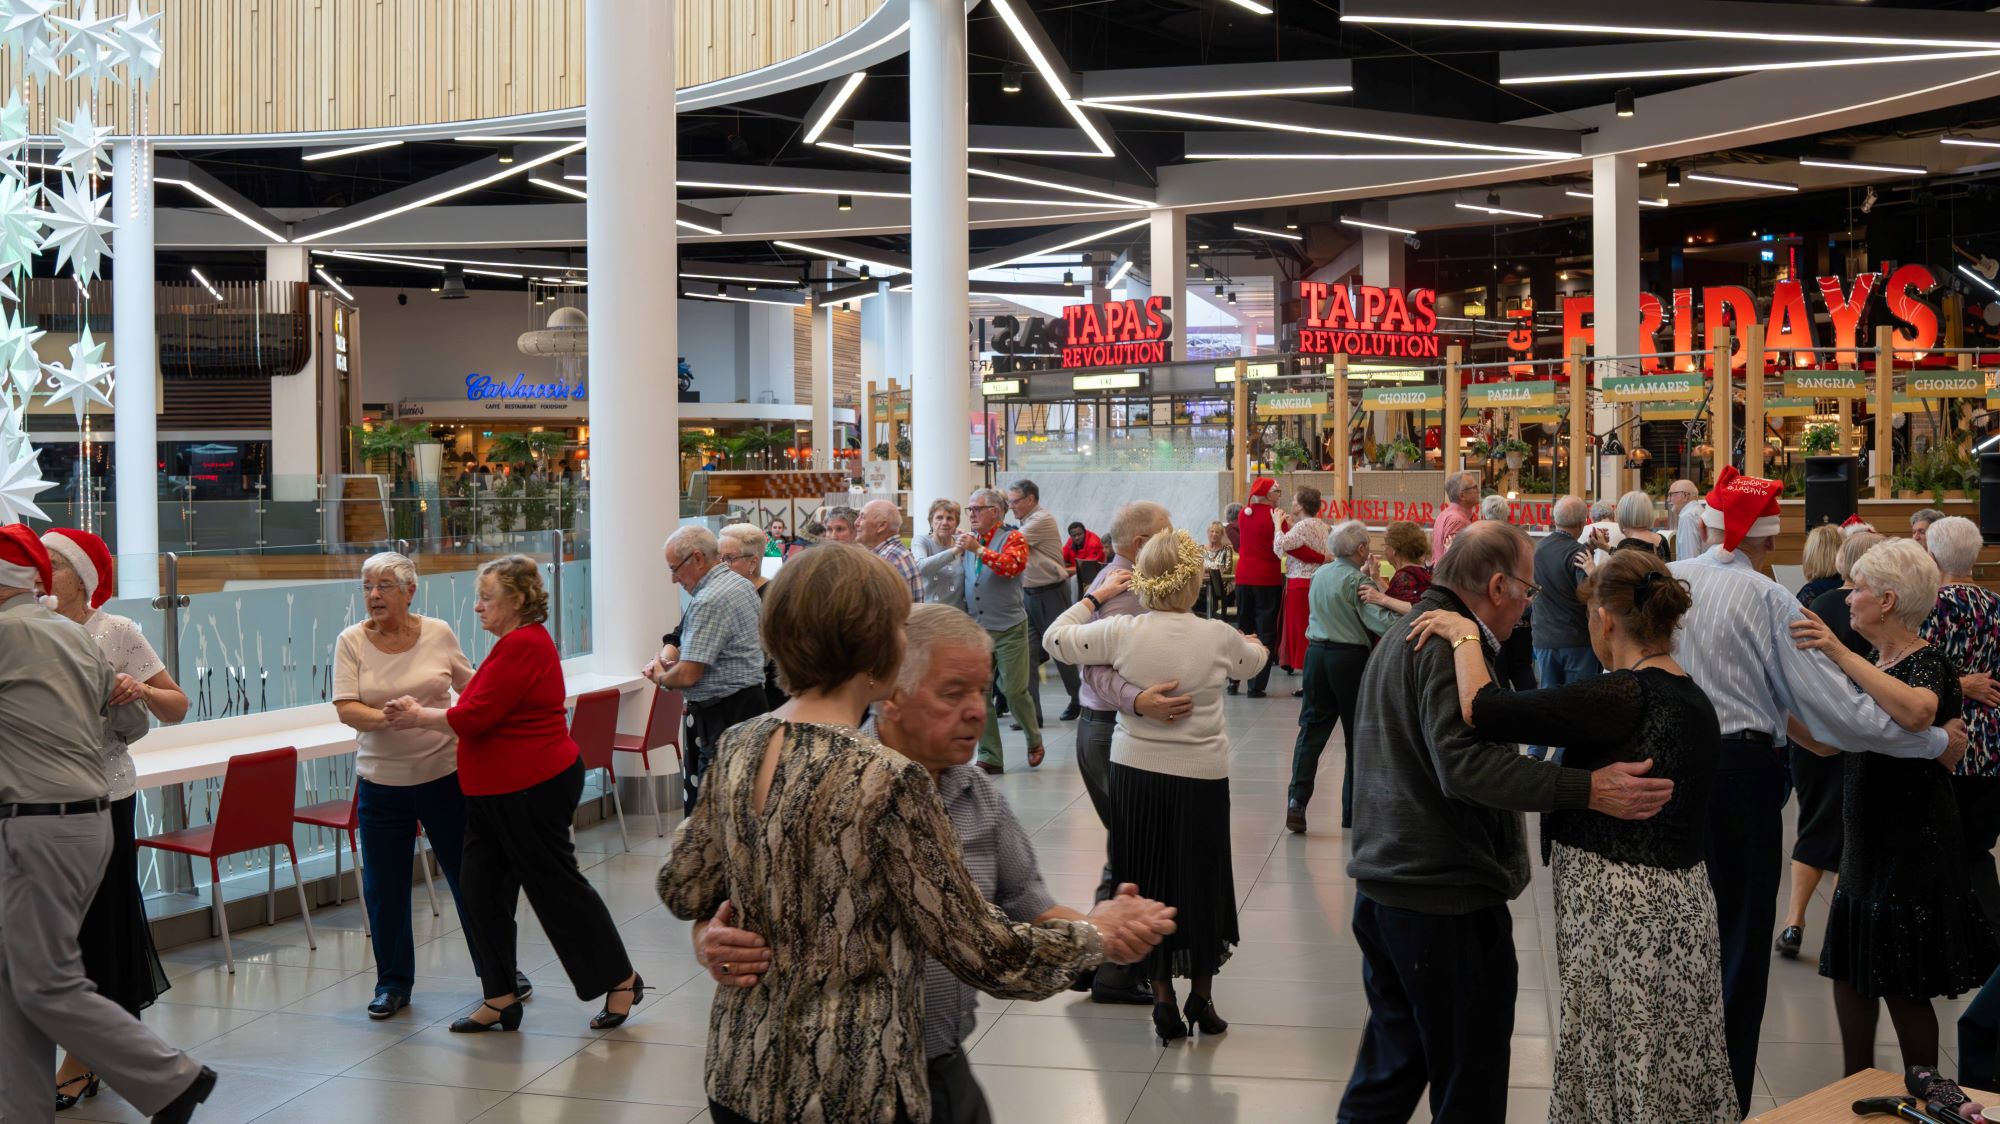 Meadowhall to host free Tea Dance for local community this VE Day